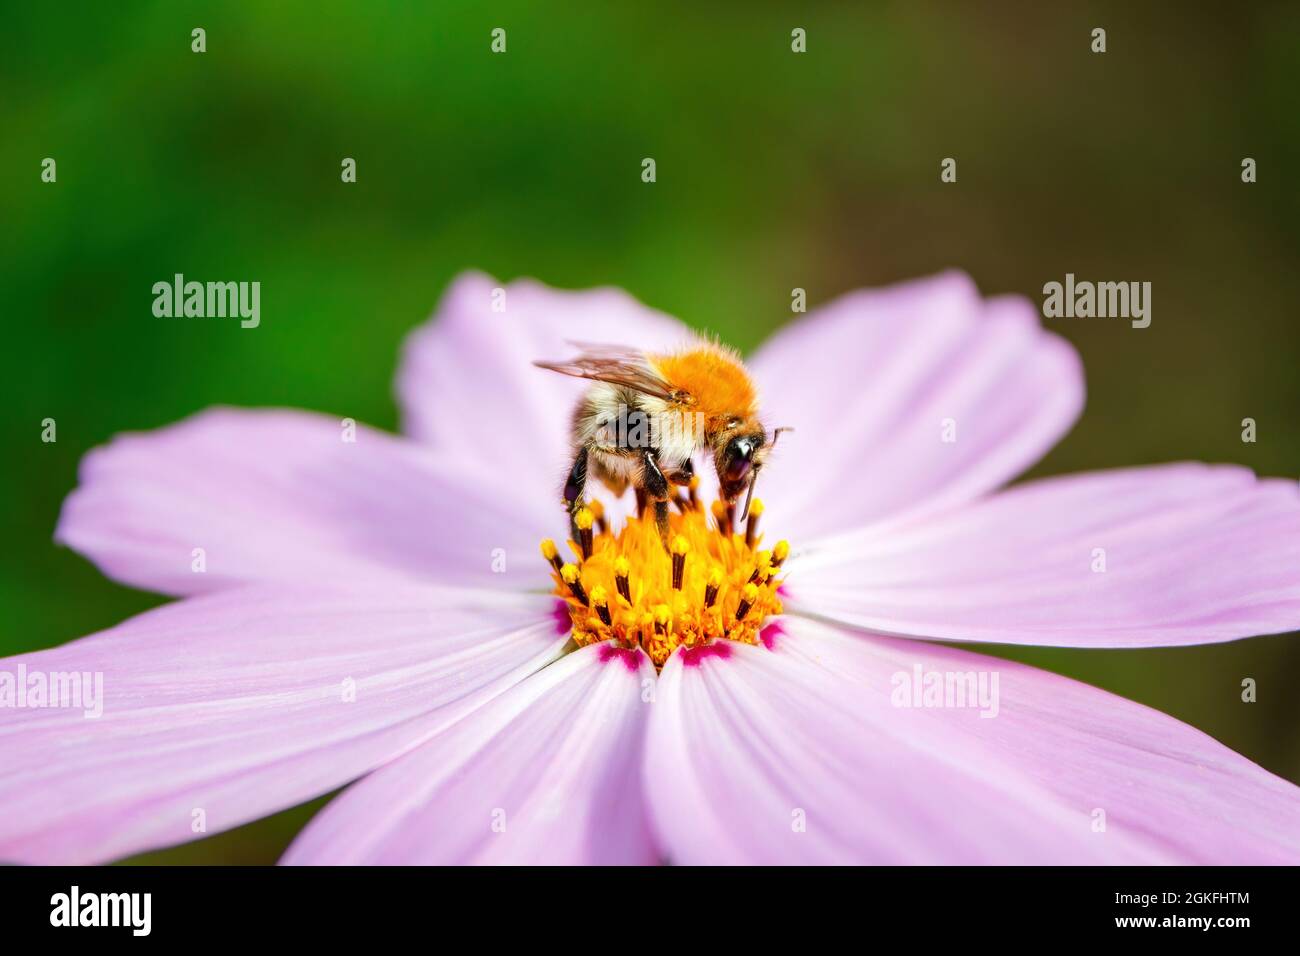 Bombus pascuorum, the common carder bee, single bumblebee on pink Cosmos flower, selective focus Stock Photo